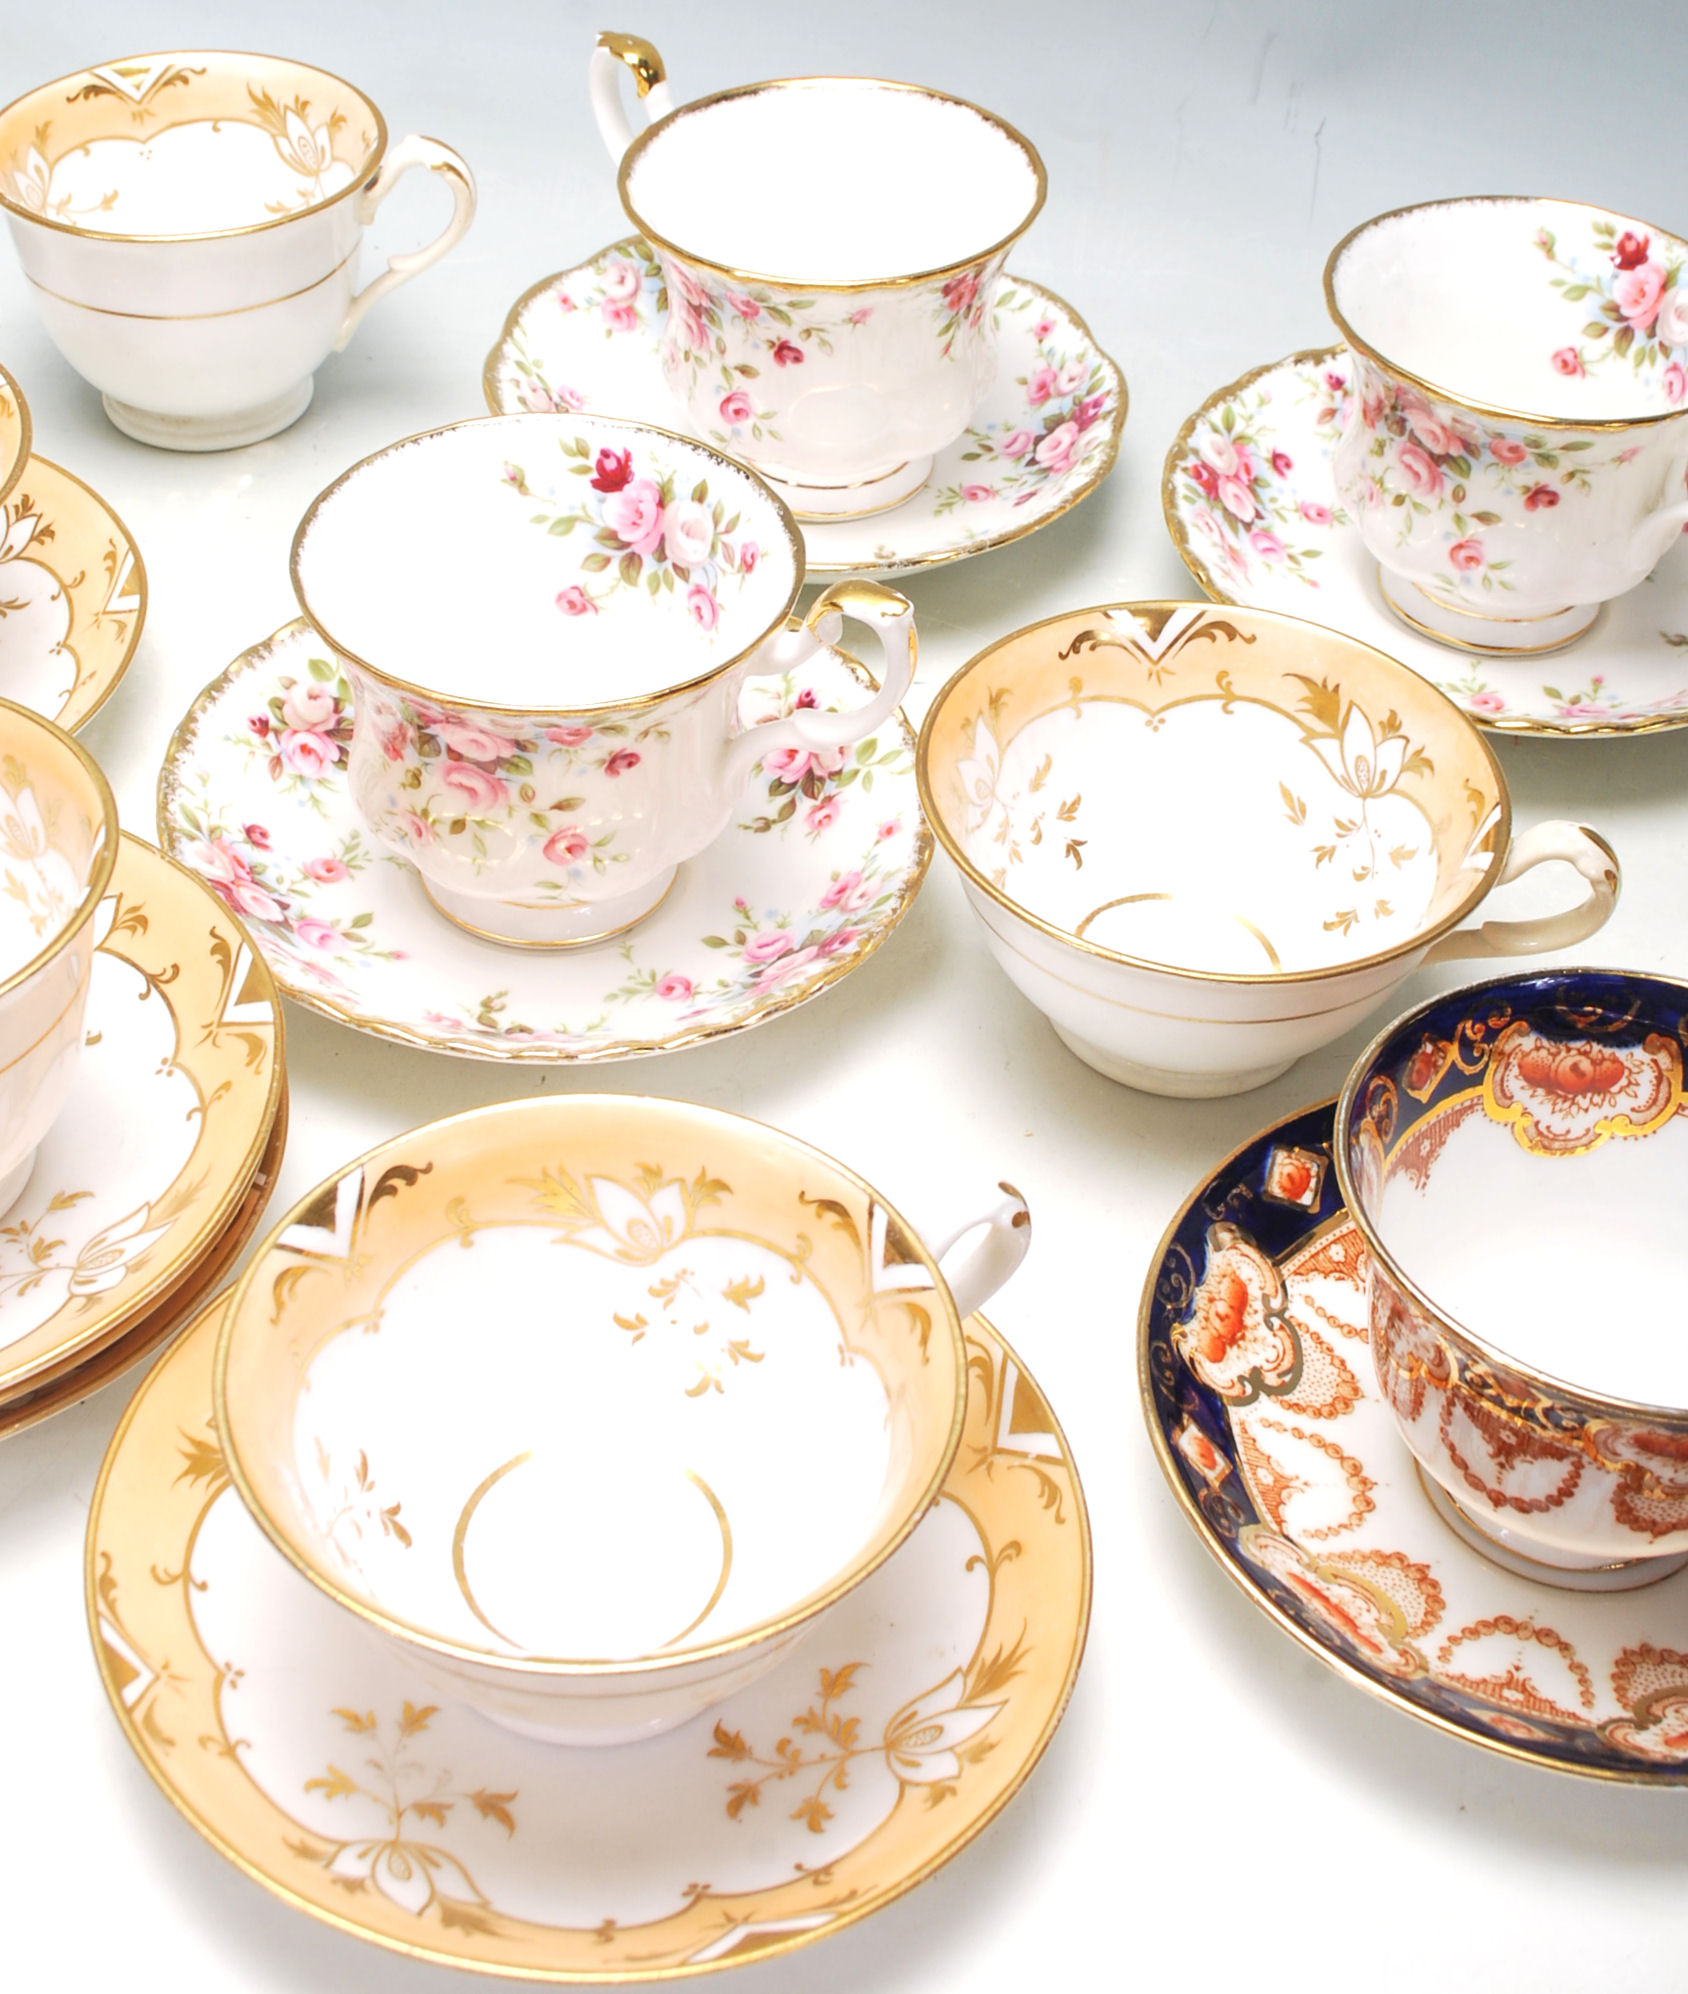 Two vintage Royal Albert English china tea services to include an Imari pattern tea service - Image 5 of 10